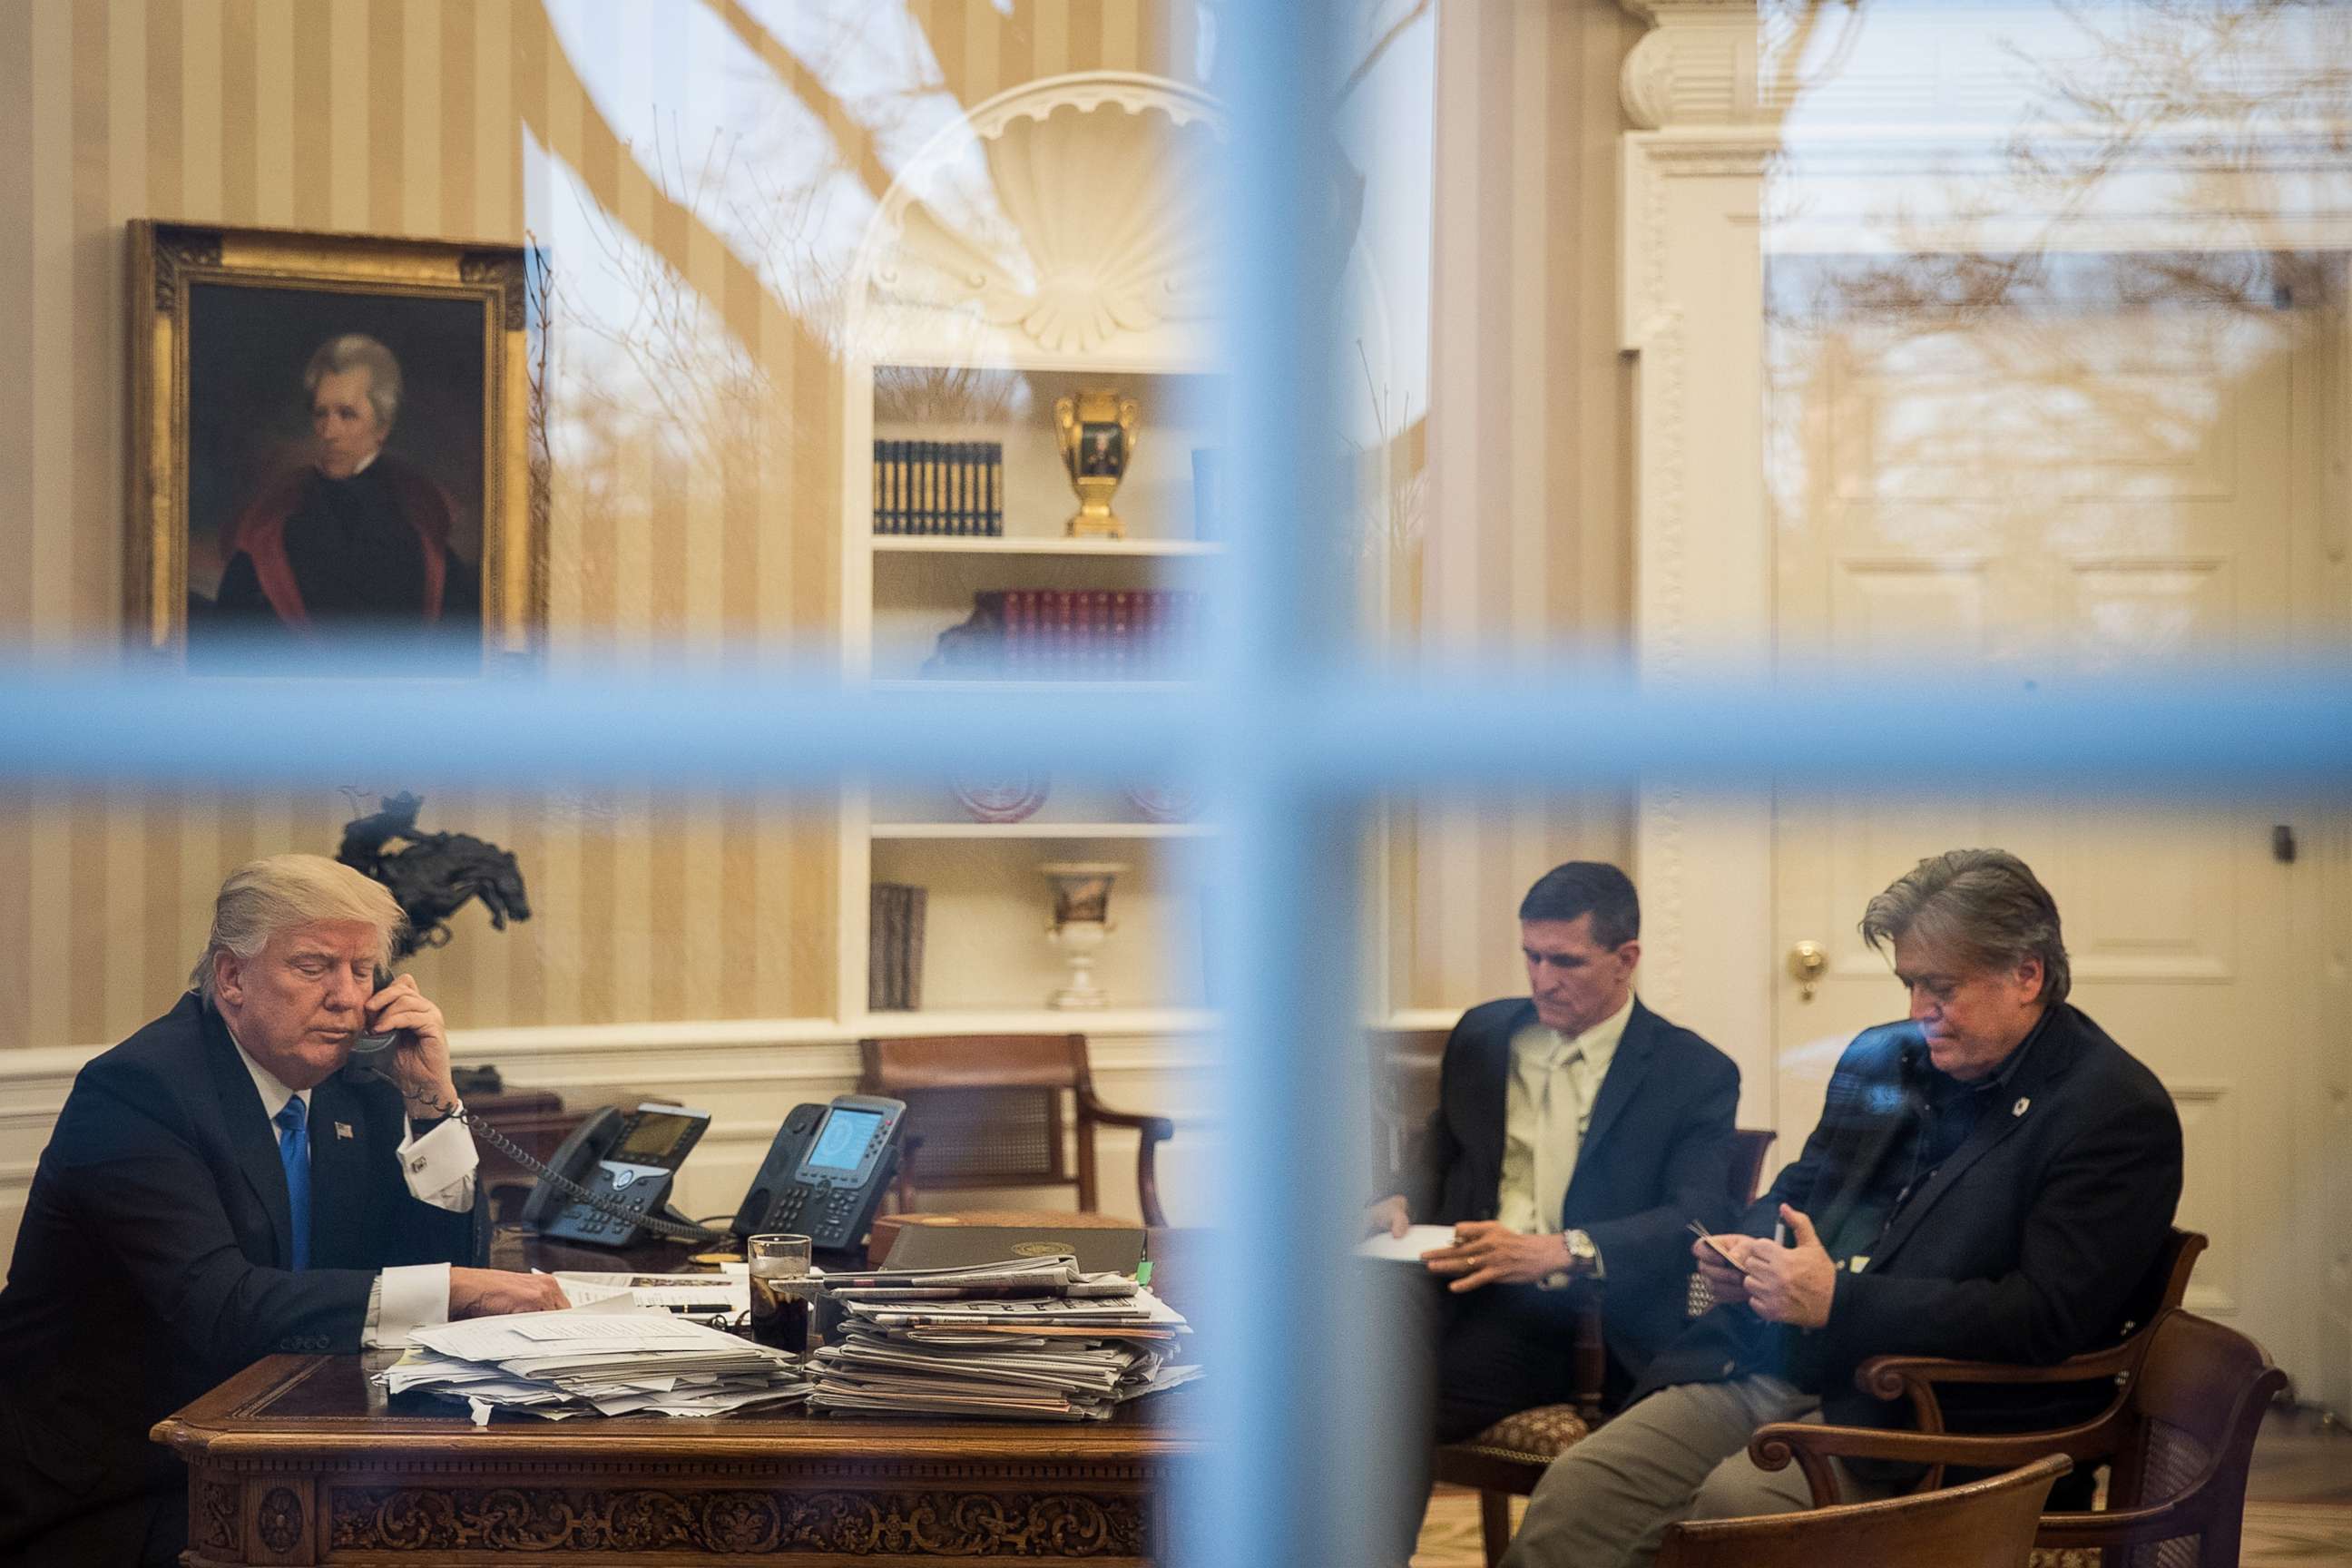 PHOTO: In this Jan. 28, 2017, file photo, President Donald Trump speaks on the phone in the Oval Office of the White House in Washington, D.C., as National Security Advisor Michael Flynn and White House Chief Strategist Steve Bannon look on.